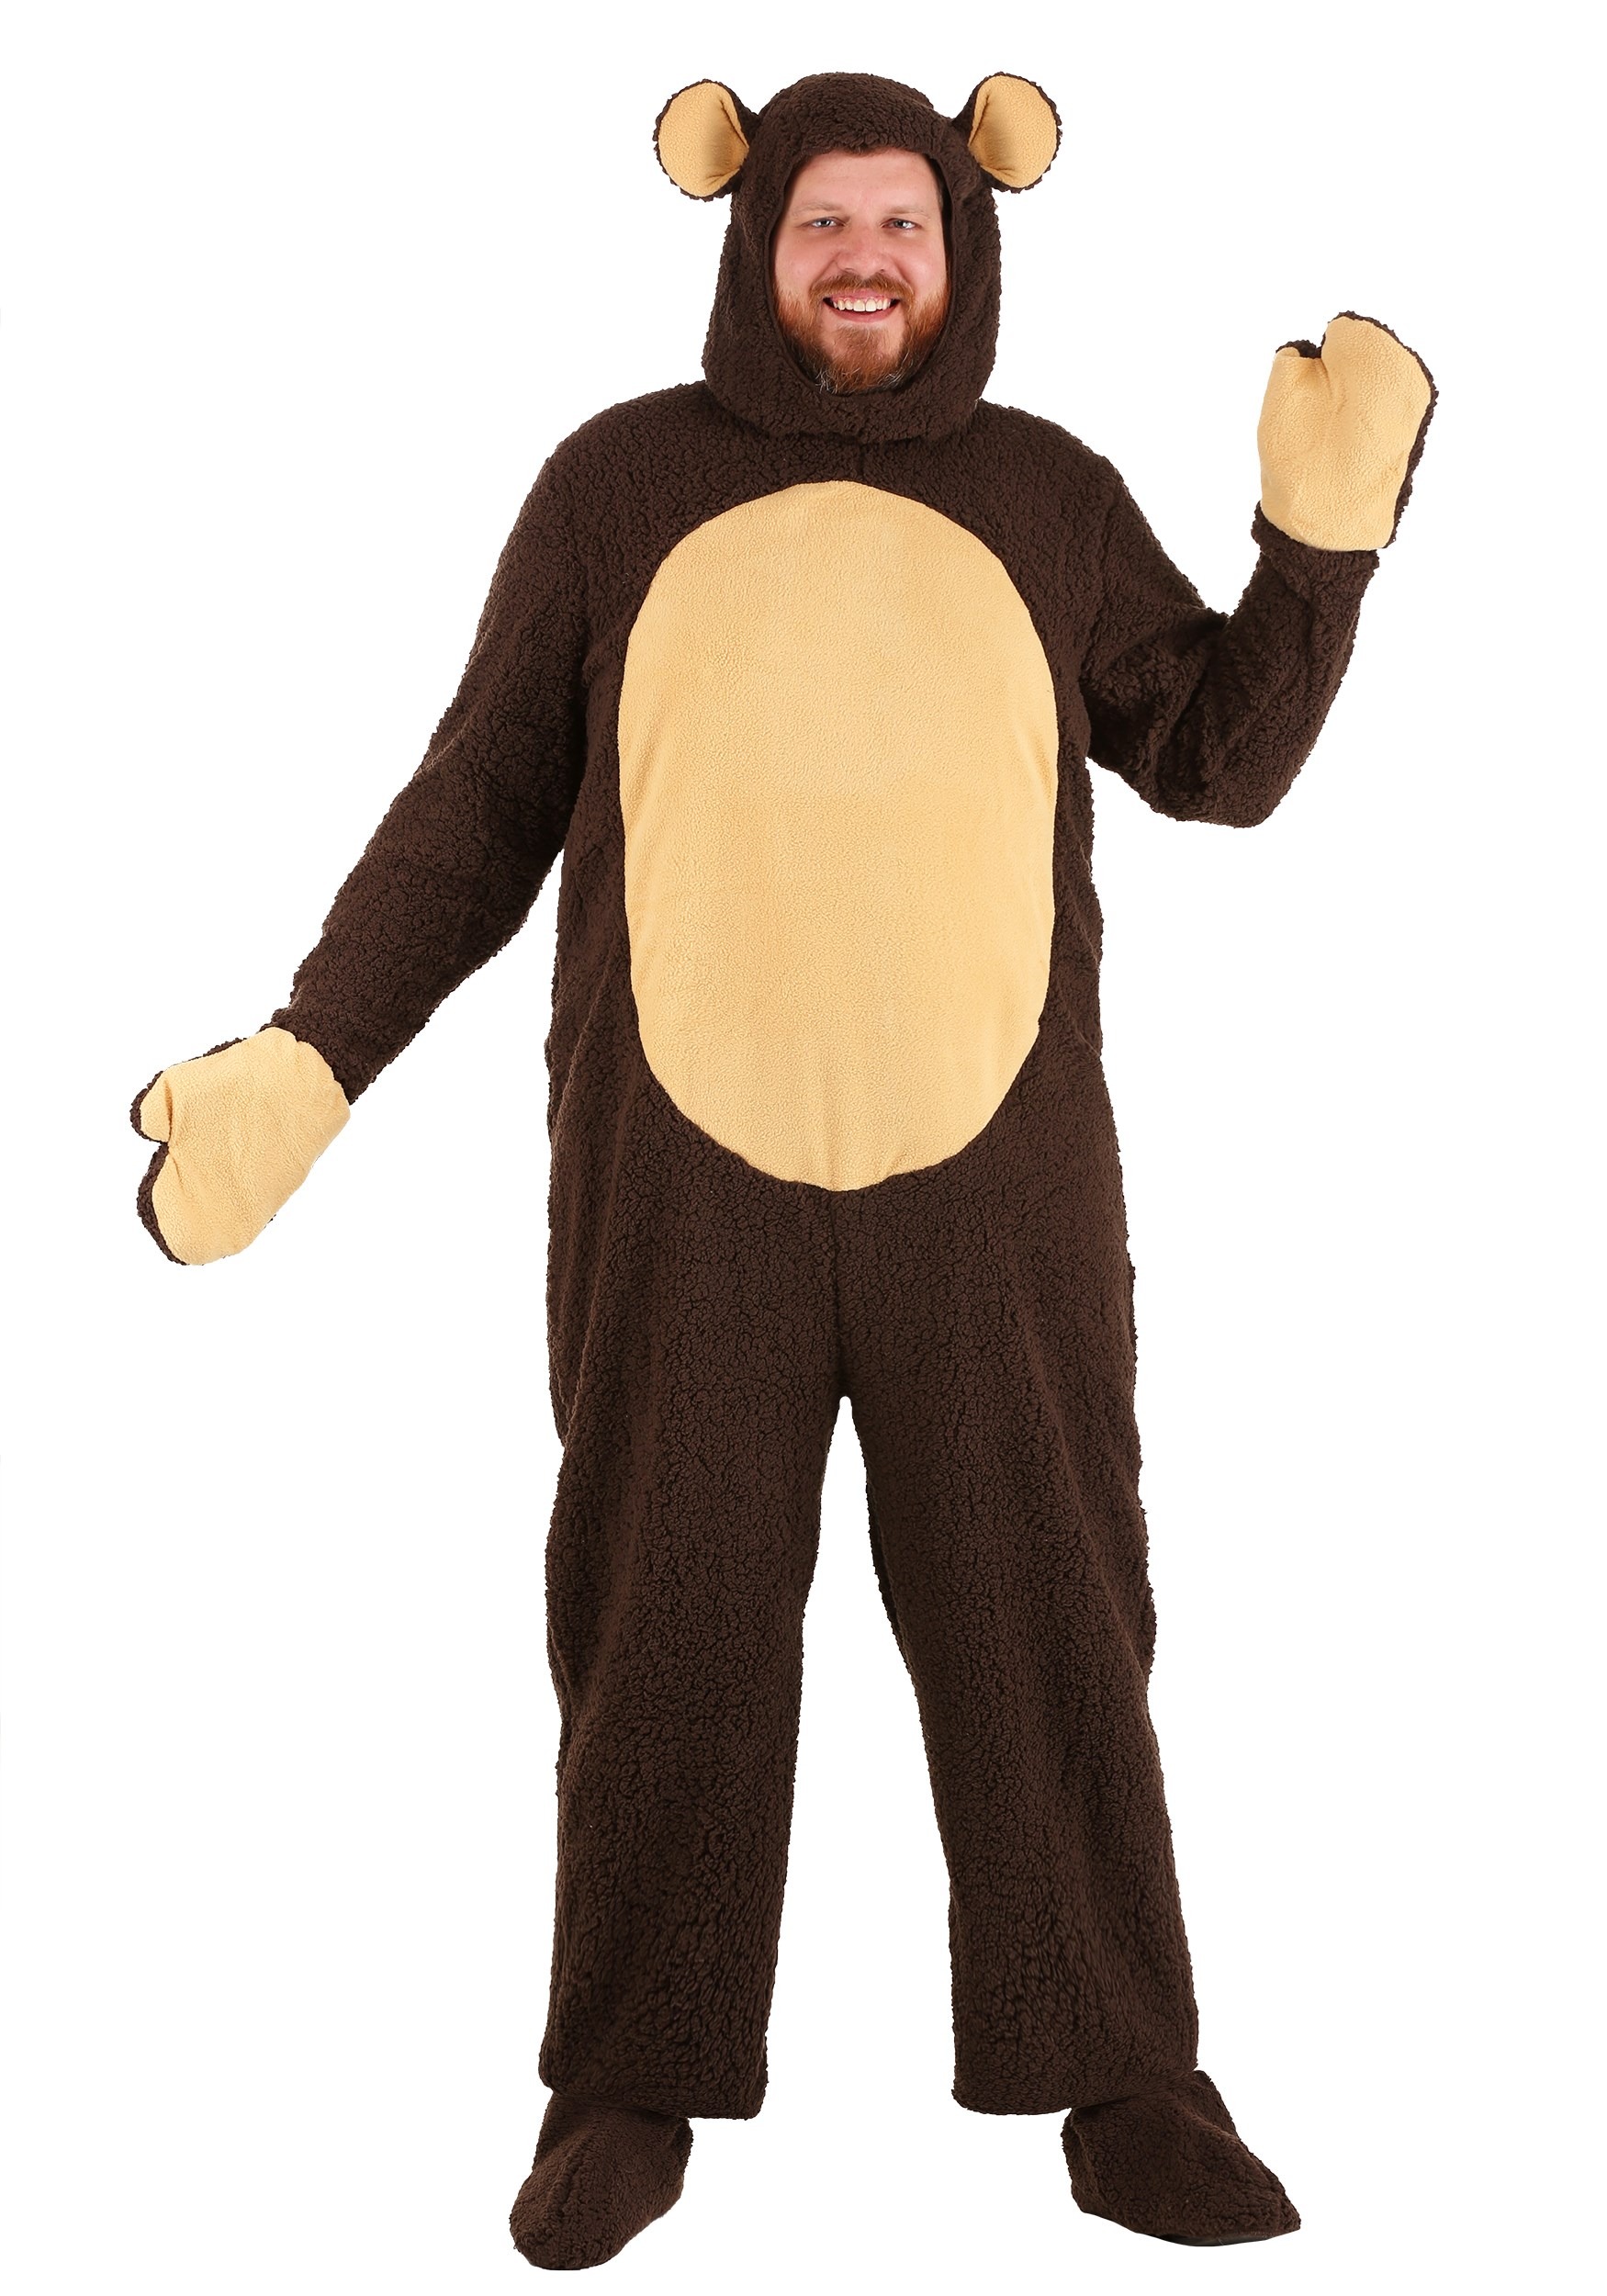 Photos - Fancy Dress BEAR FUN Costumes Storybook   Costume for Adults Brown/Beige 